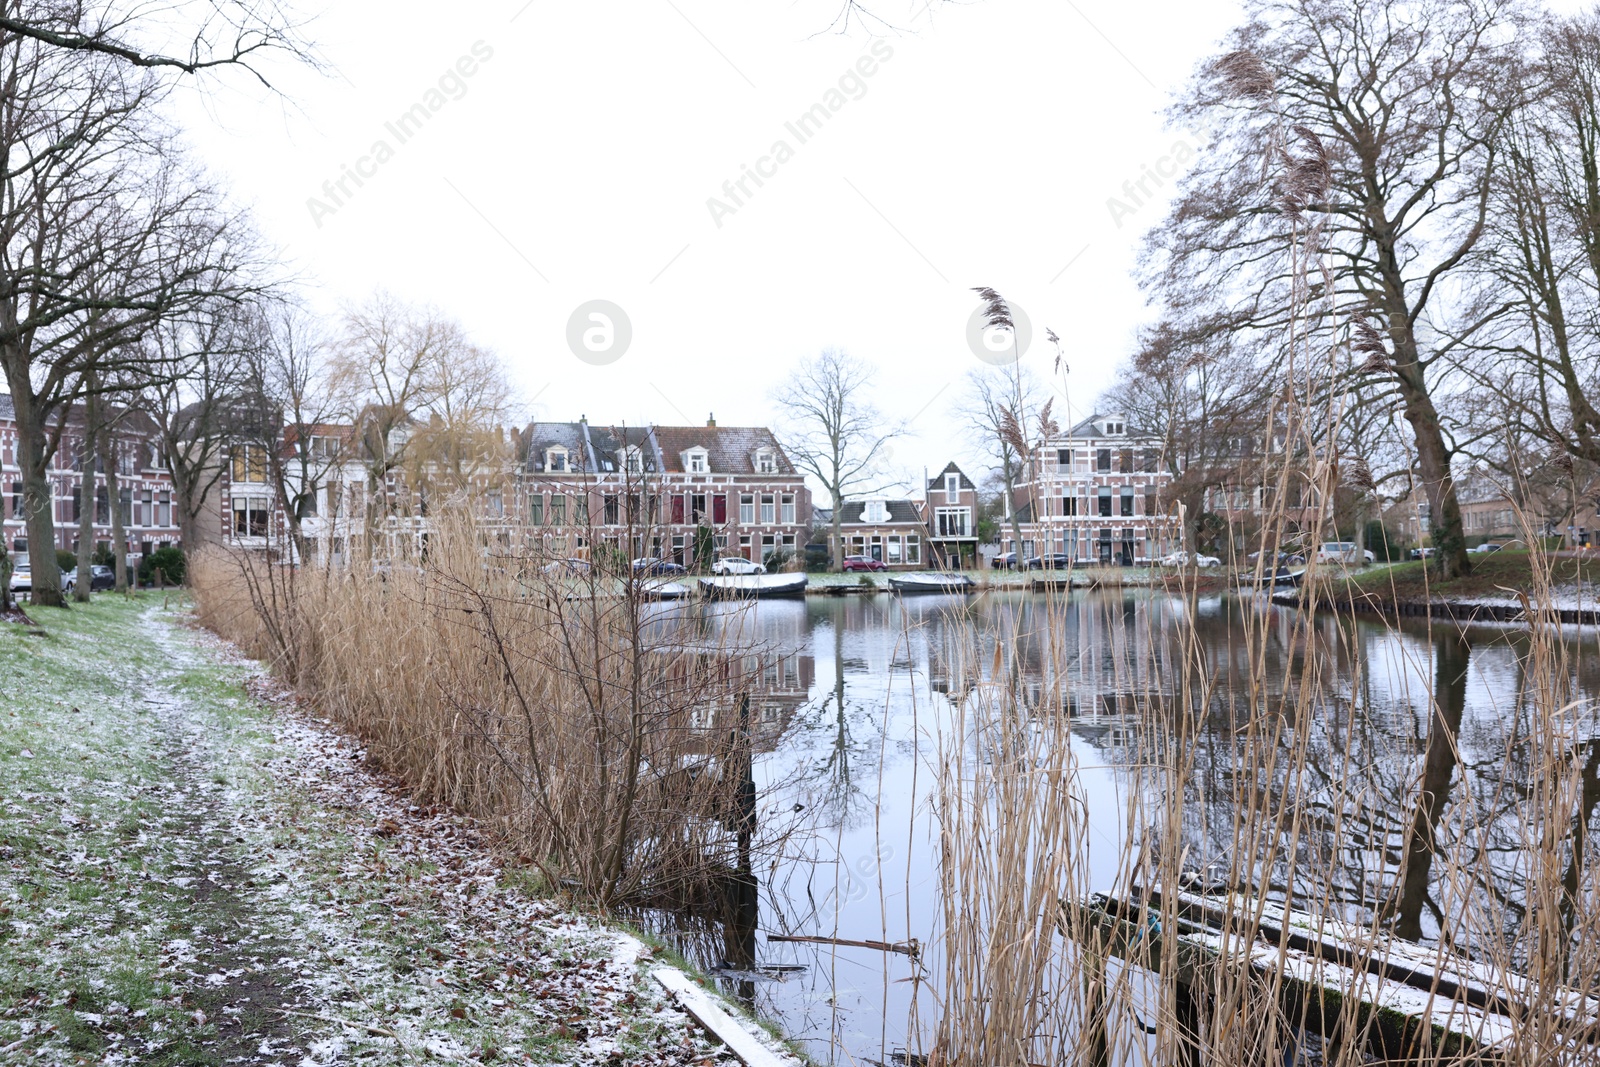 Photo of Picturesque view of water canal with moored boats, trees and buildings in city on winter day